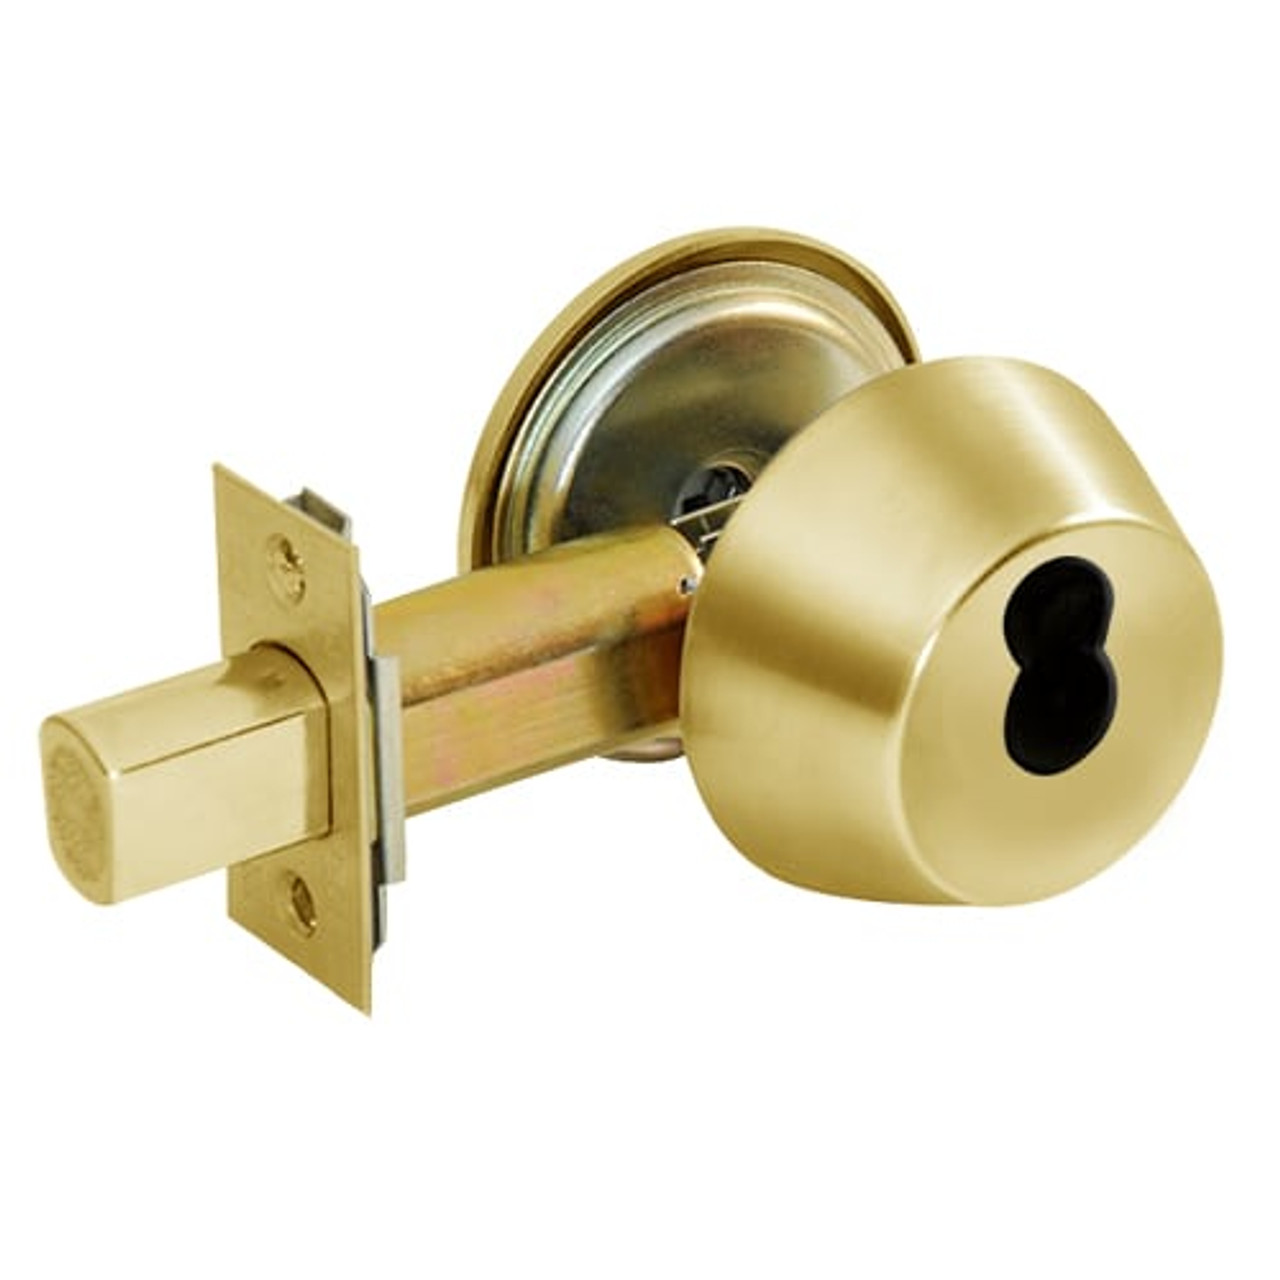 DL3211-605-CL6 Corbin DL3200 Series IC 6-Pin Less Core Cylindrical Deadlocks with Single Cylinder w/ Blank Plate in Bright Brass Finish